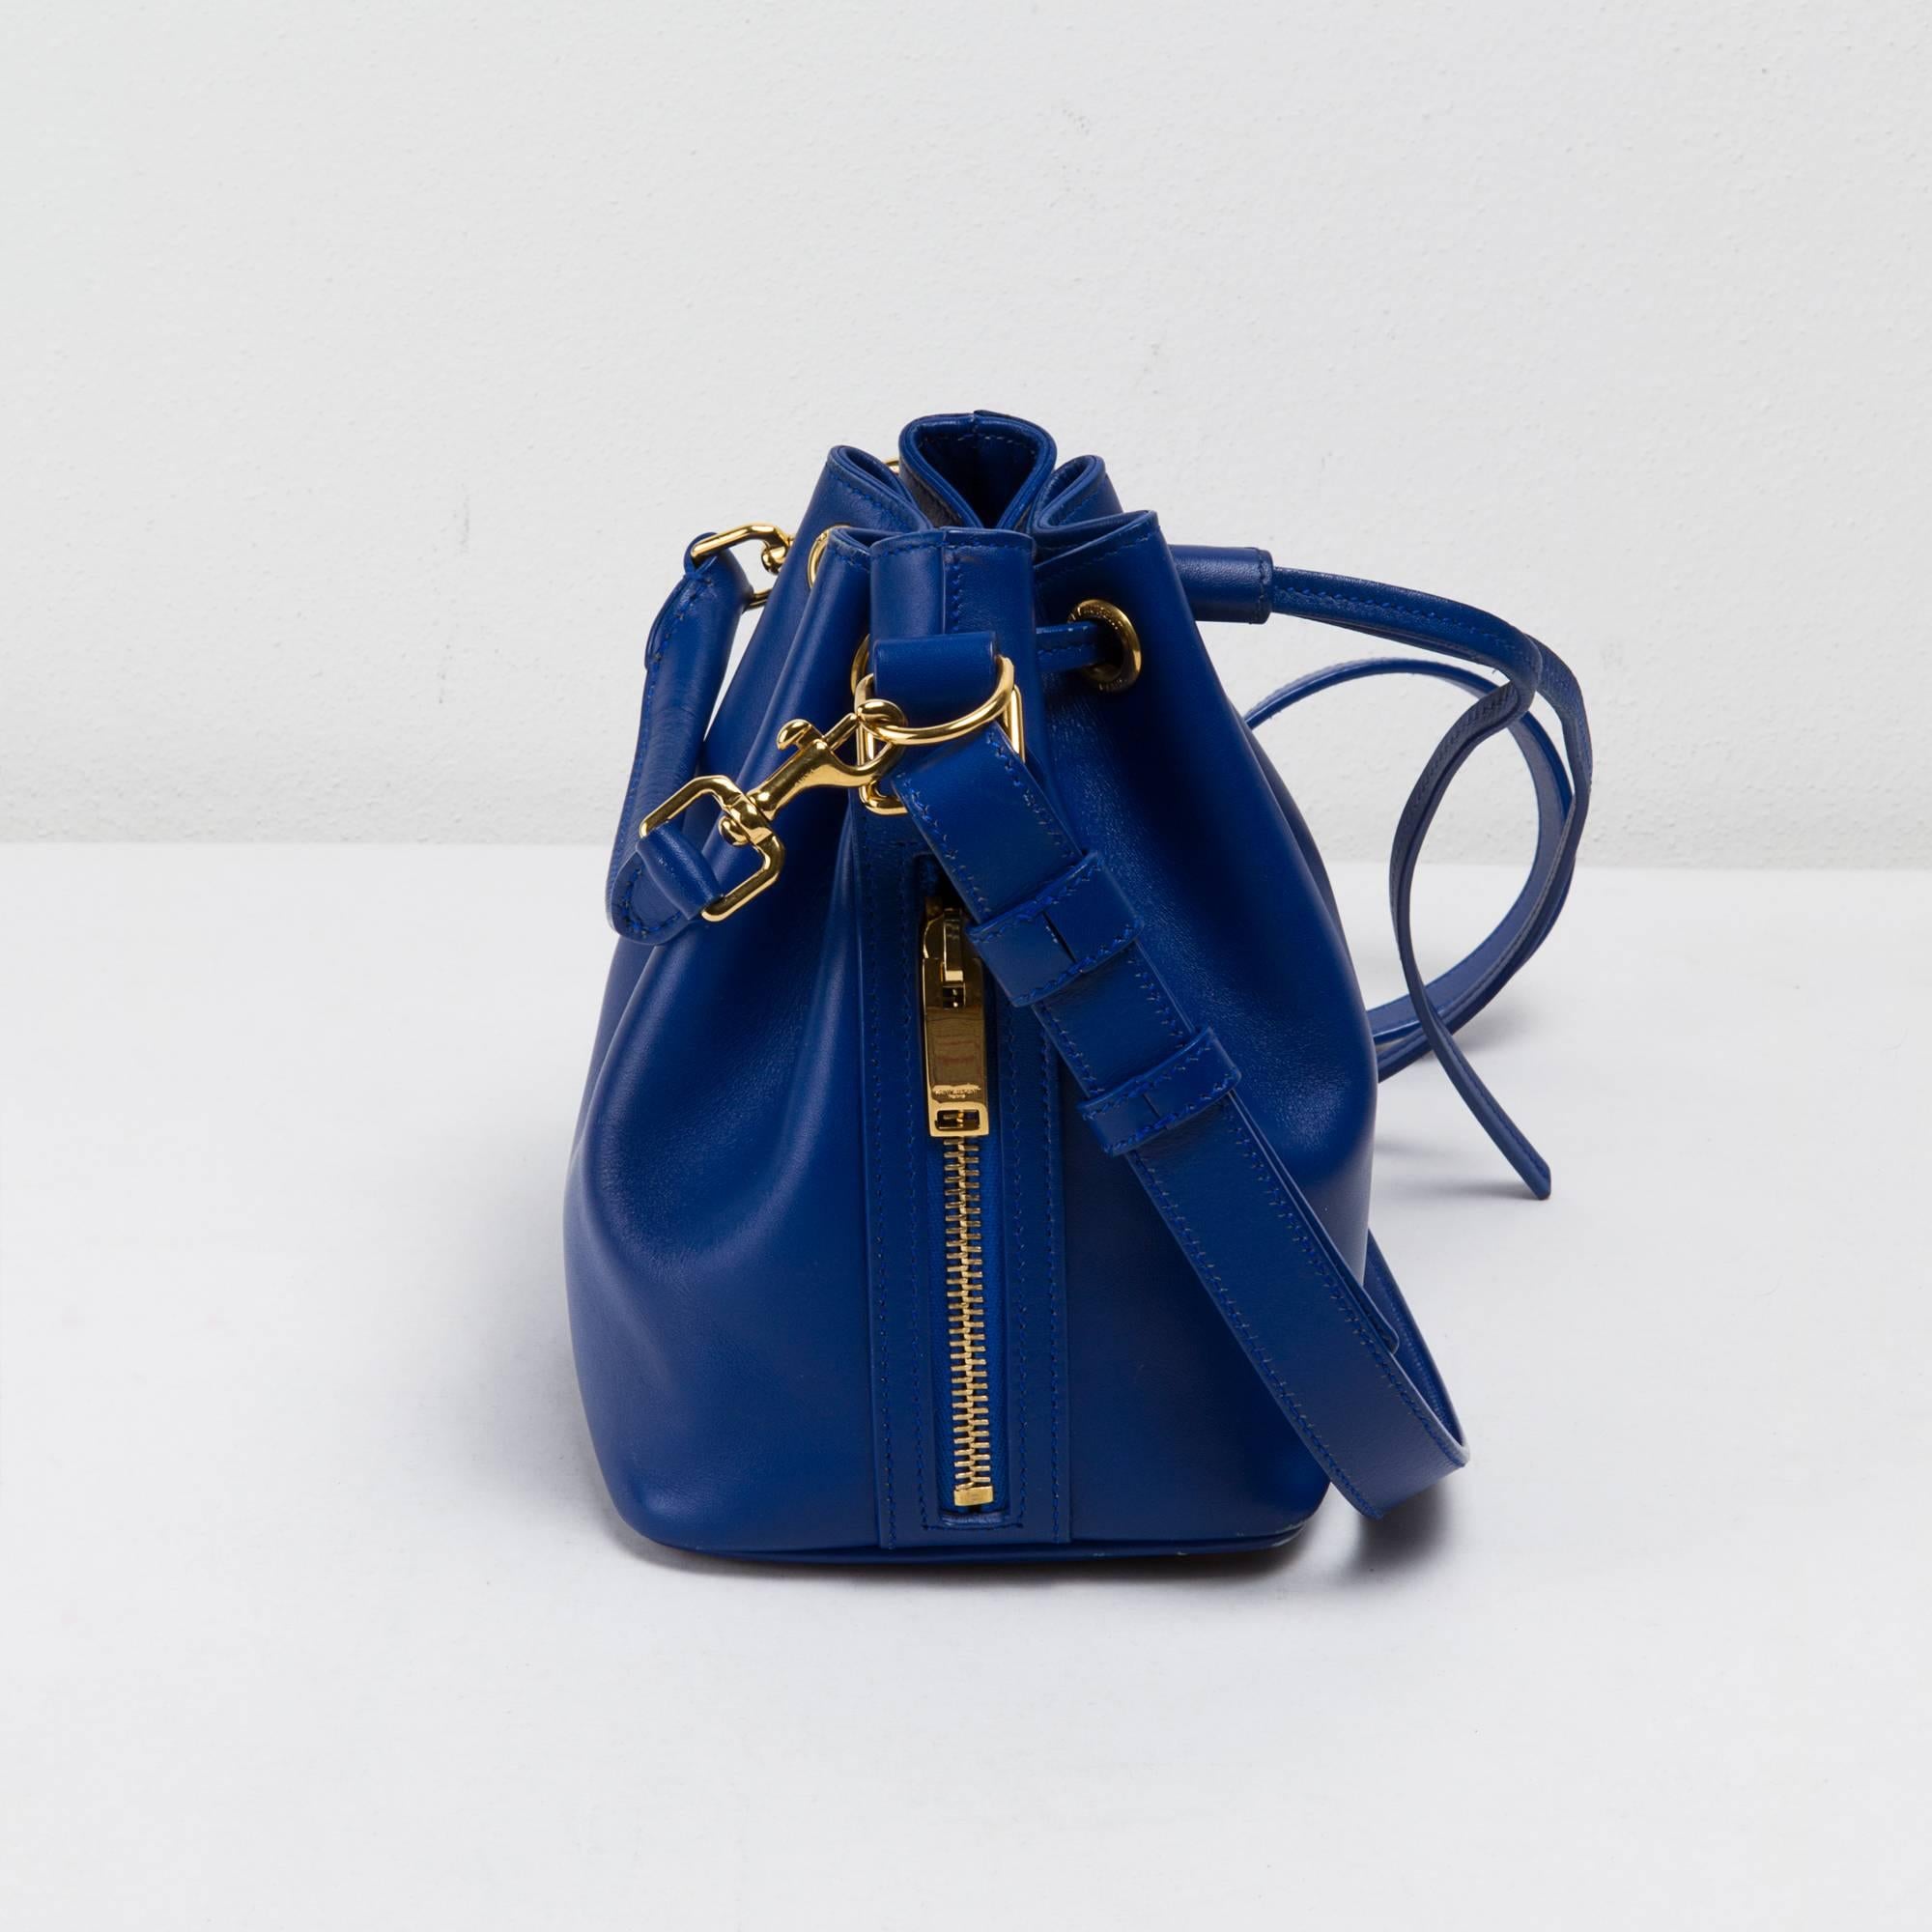 Yves Saint Laurent, small bucket in electric blue leather.
Adjustable shoulder strap; it can be worn crossbody.
Very light signs of wear.